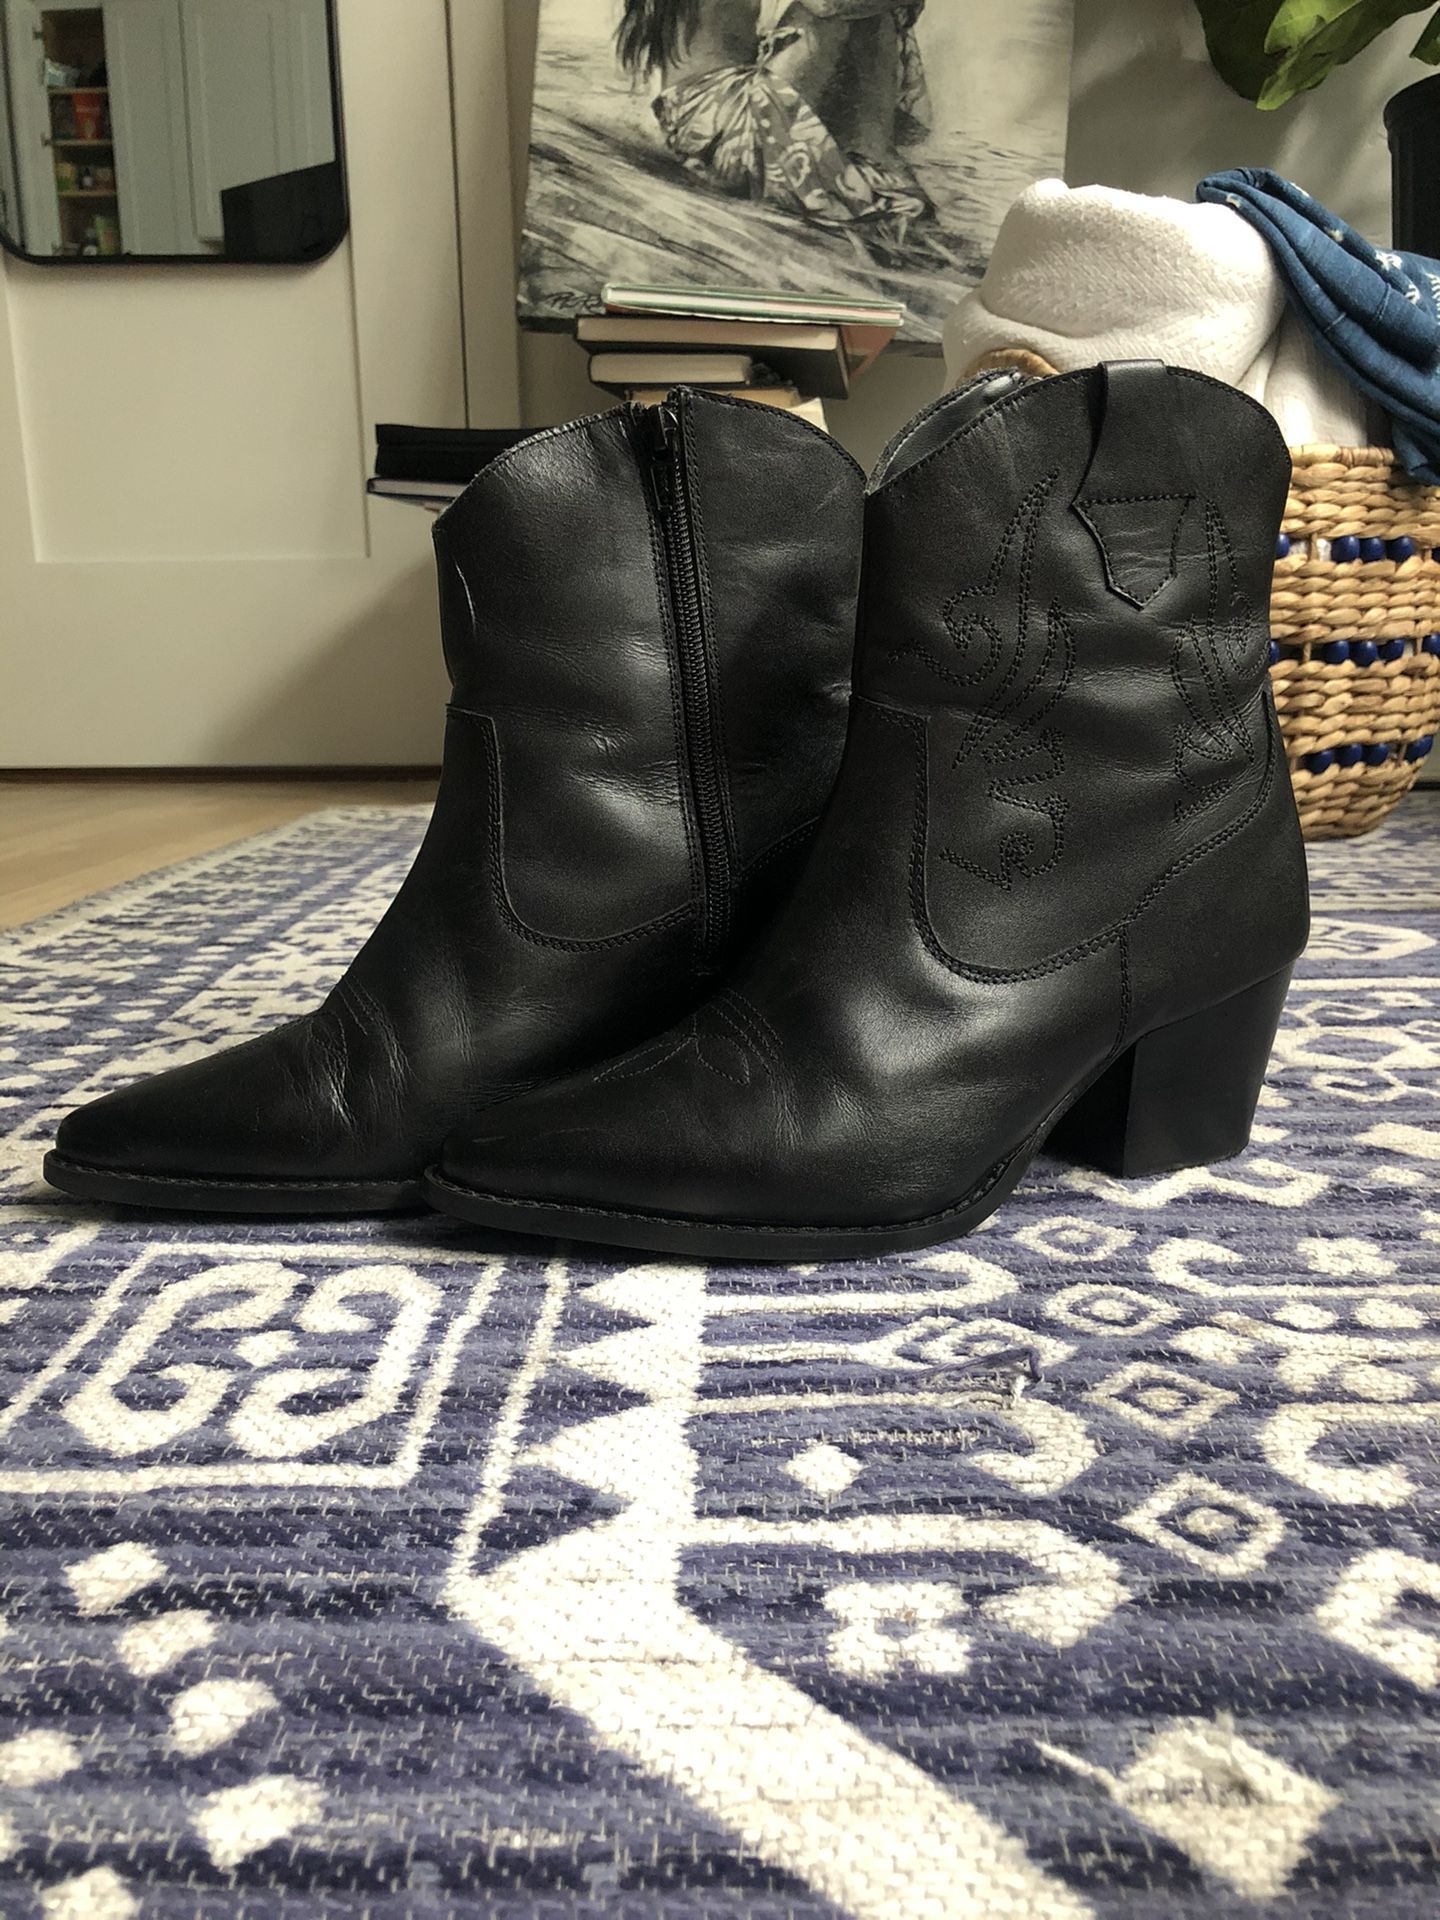 Nasty Gal - SIZE 5 Black Leather Western Cowboy Ankle Boots